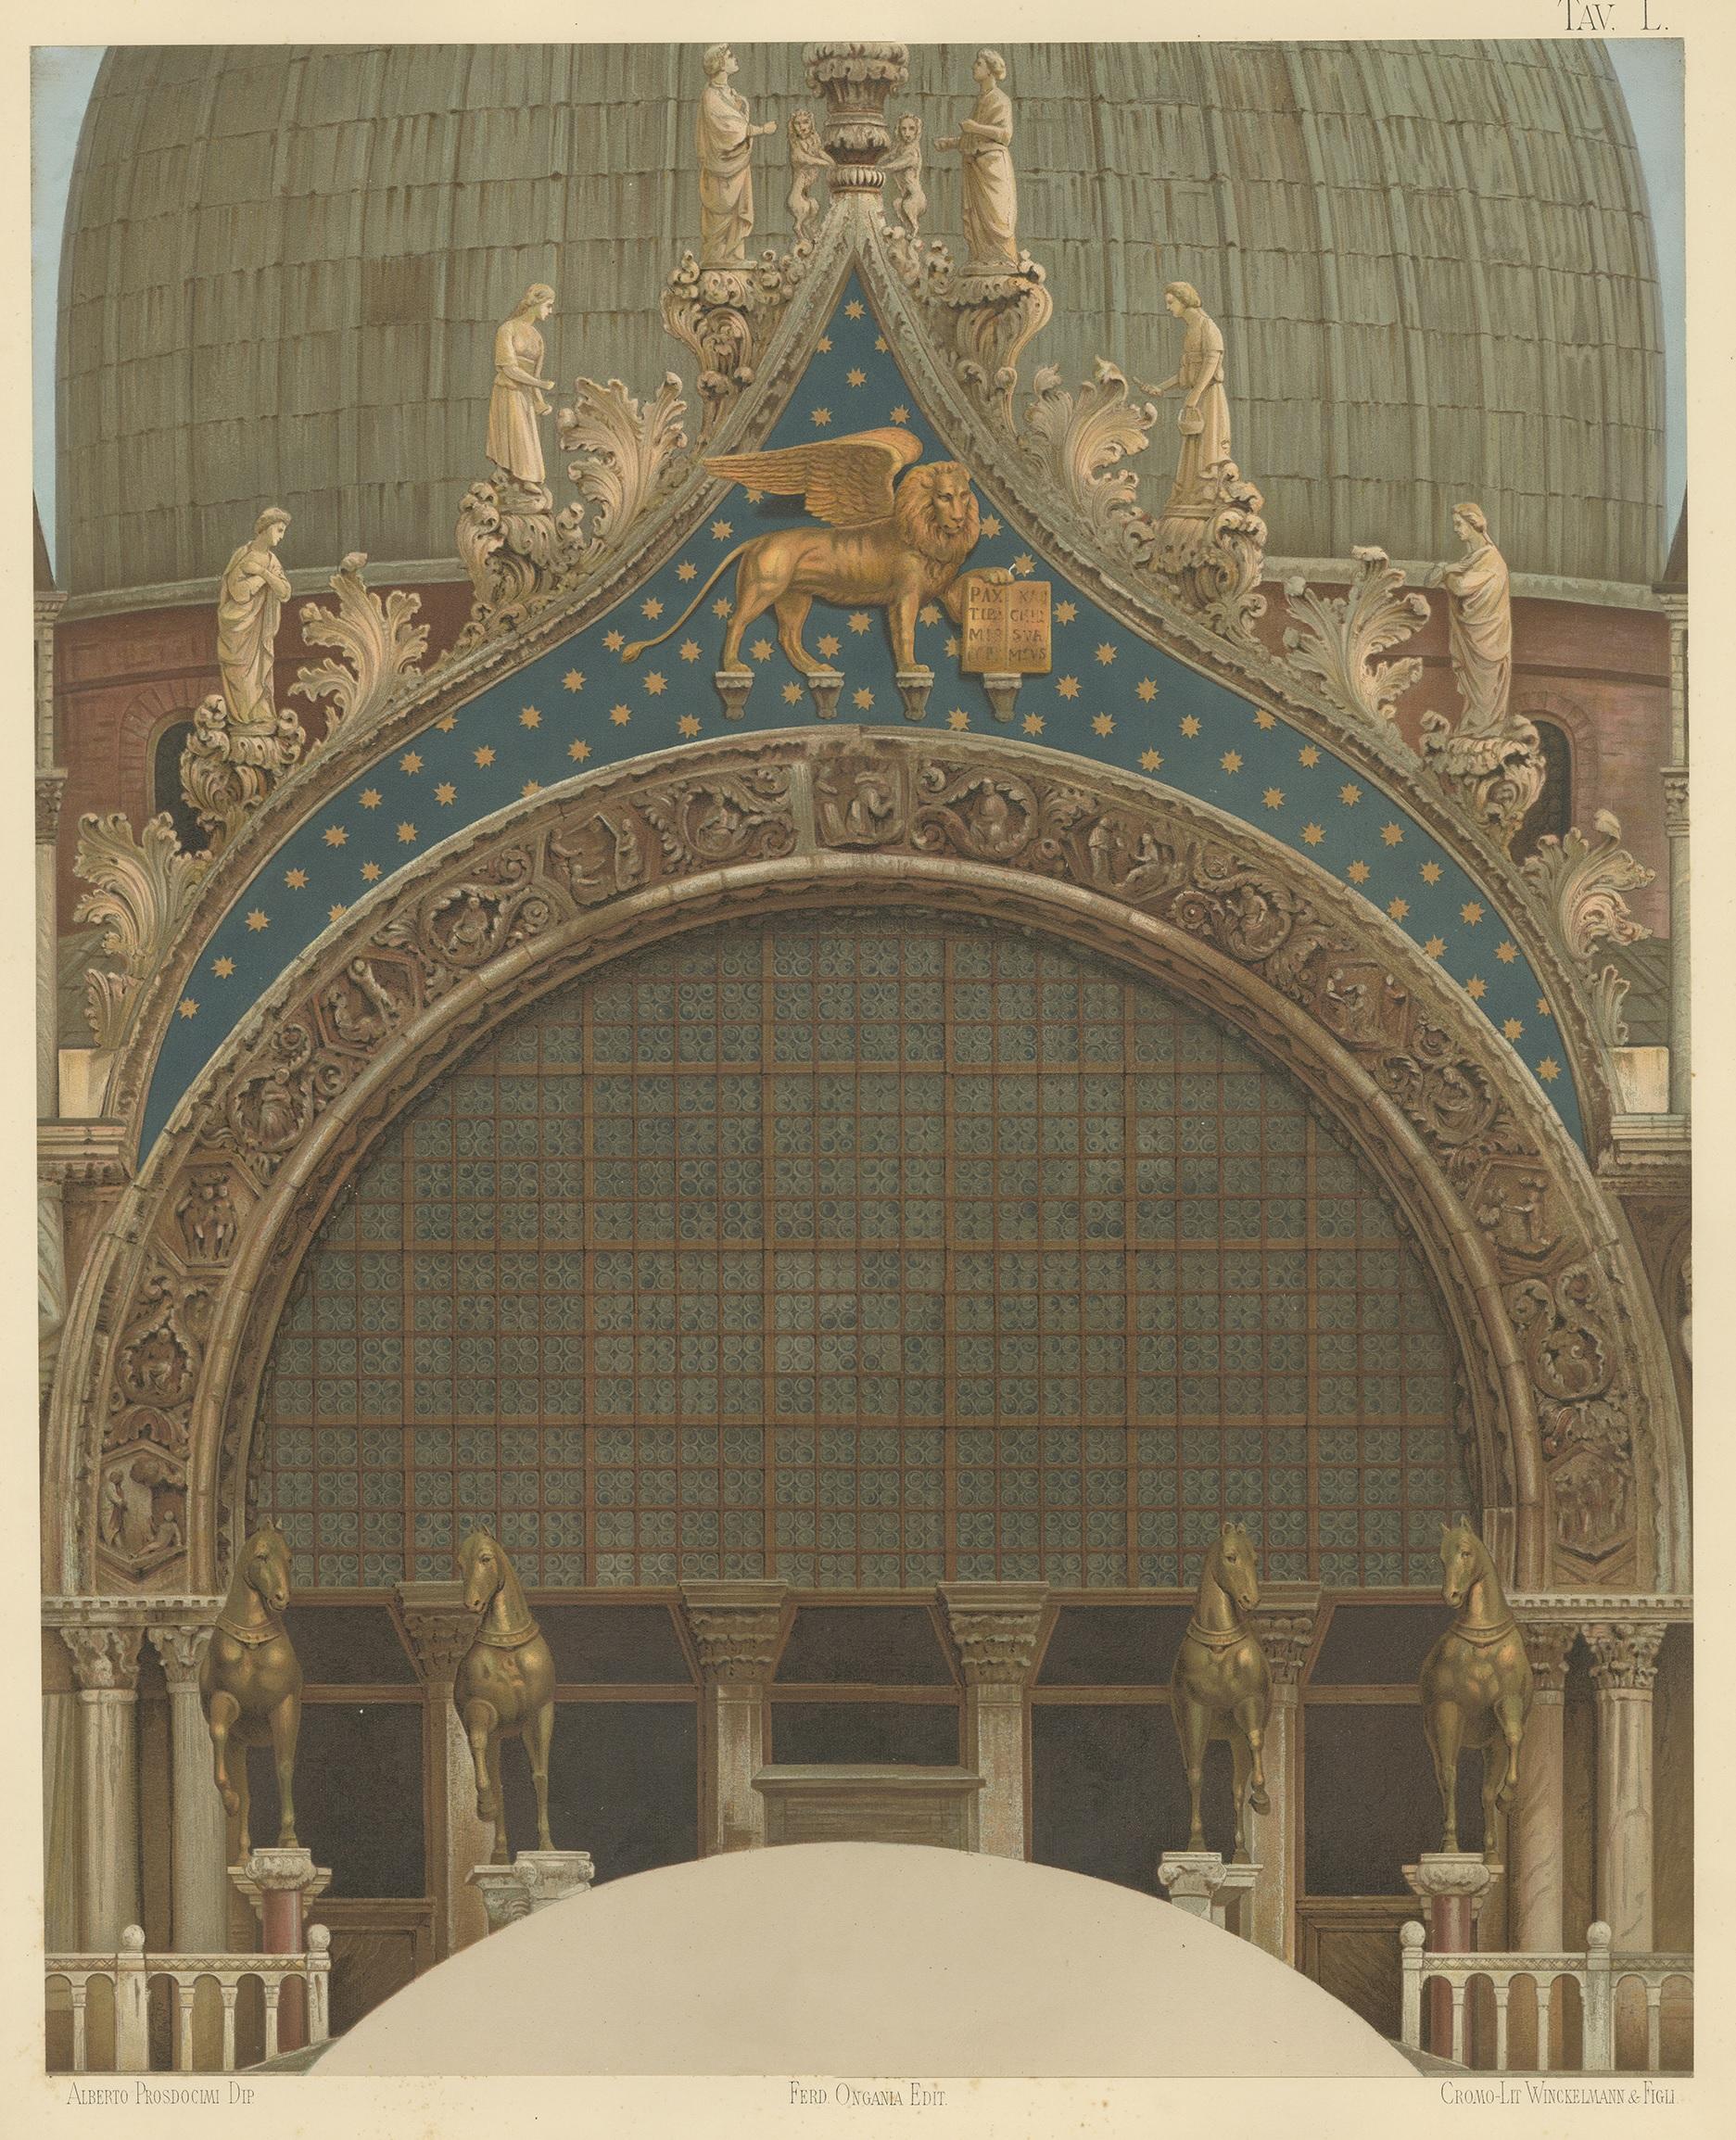 A large chromolithograph of the main portal of the Basilica of San Marco in Venice, Italy, originating from Ferdinando Ongania's 